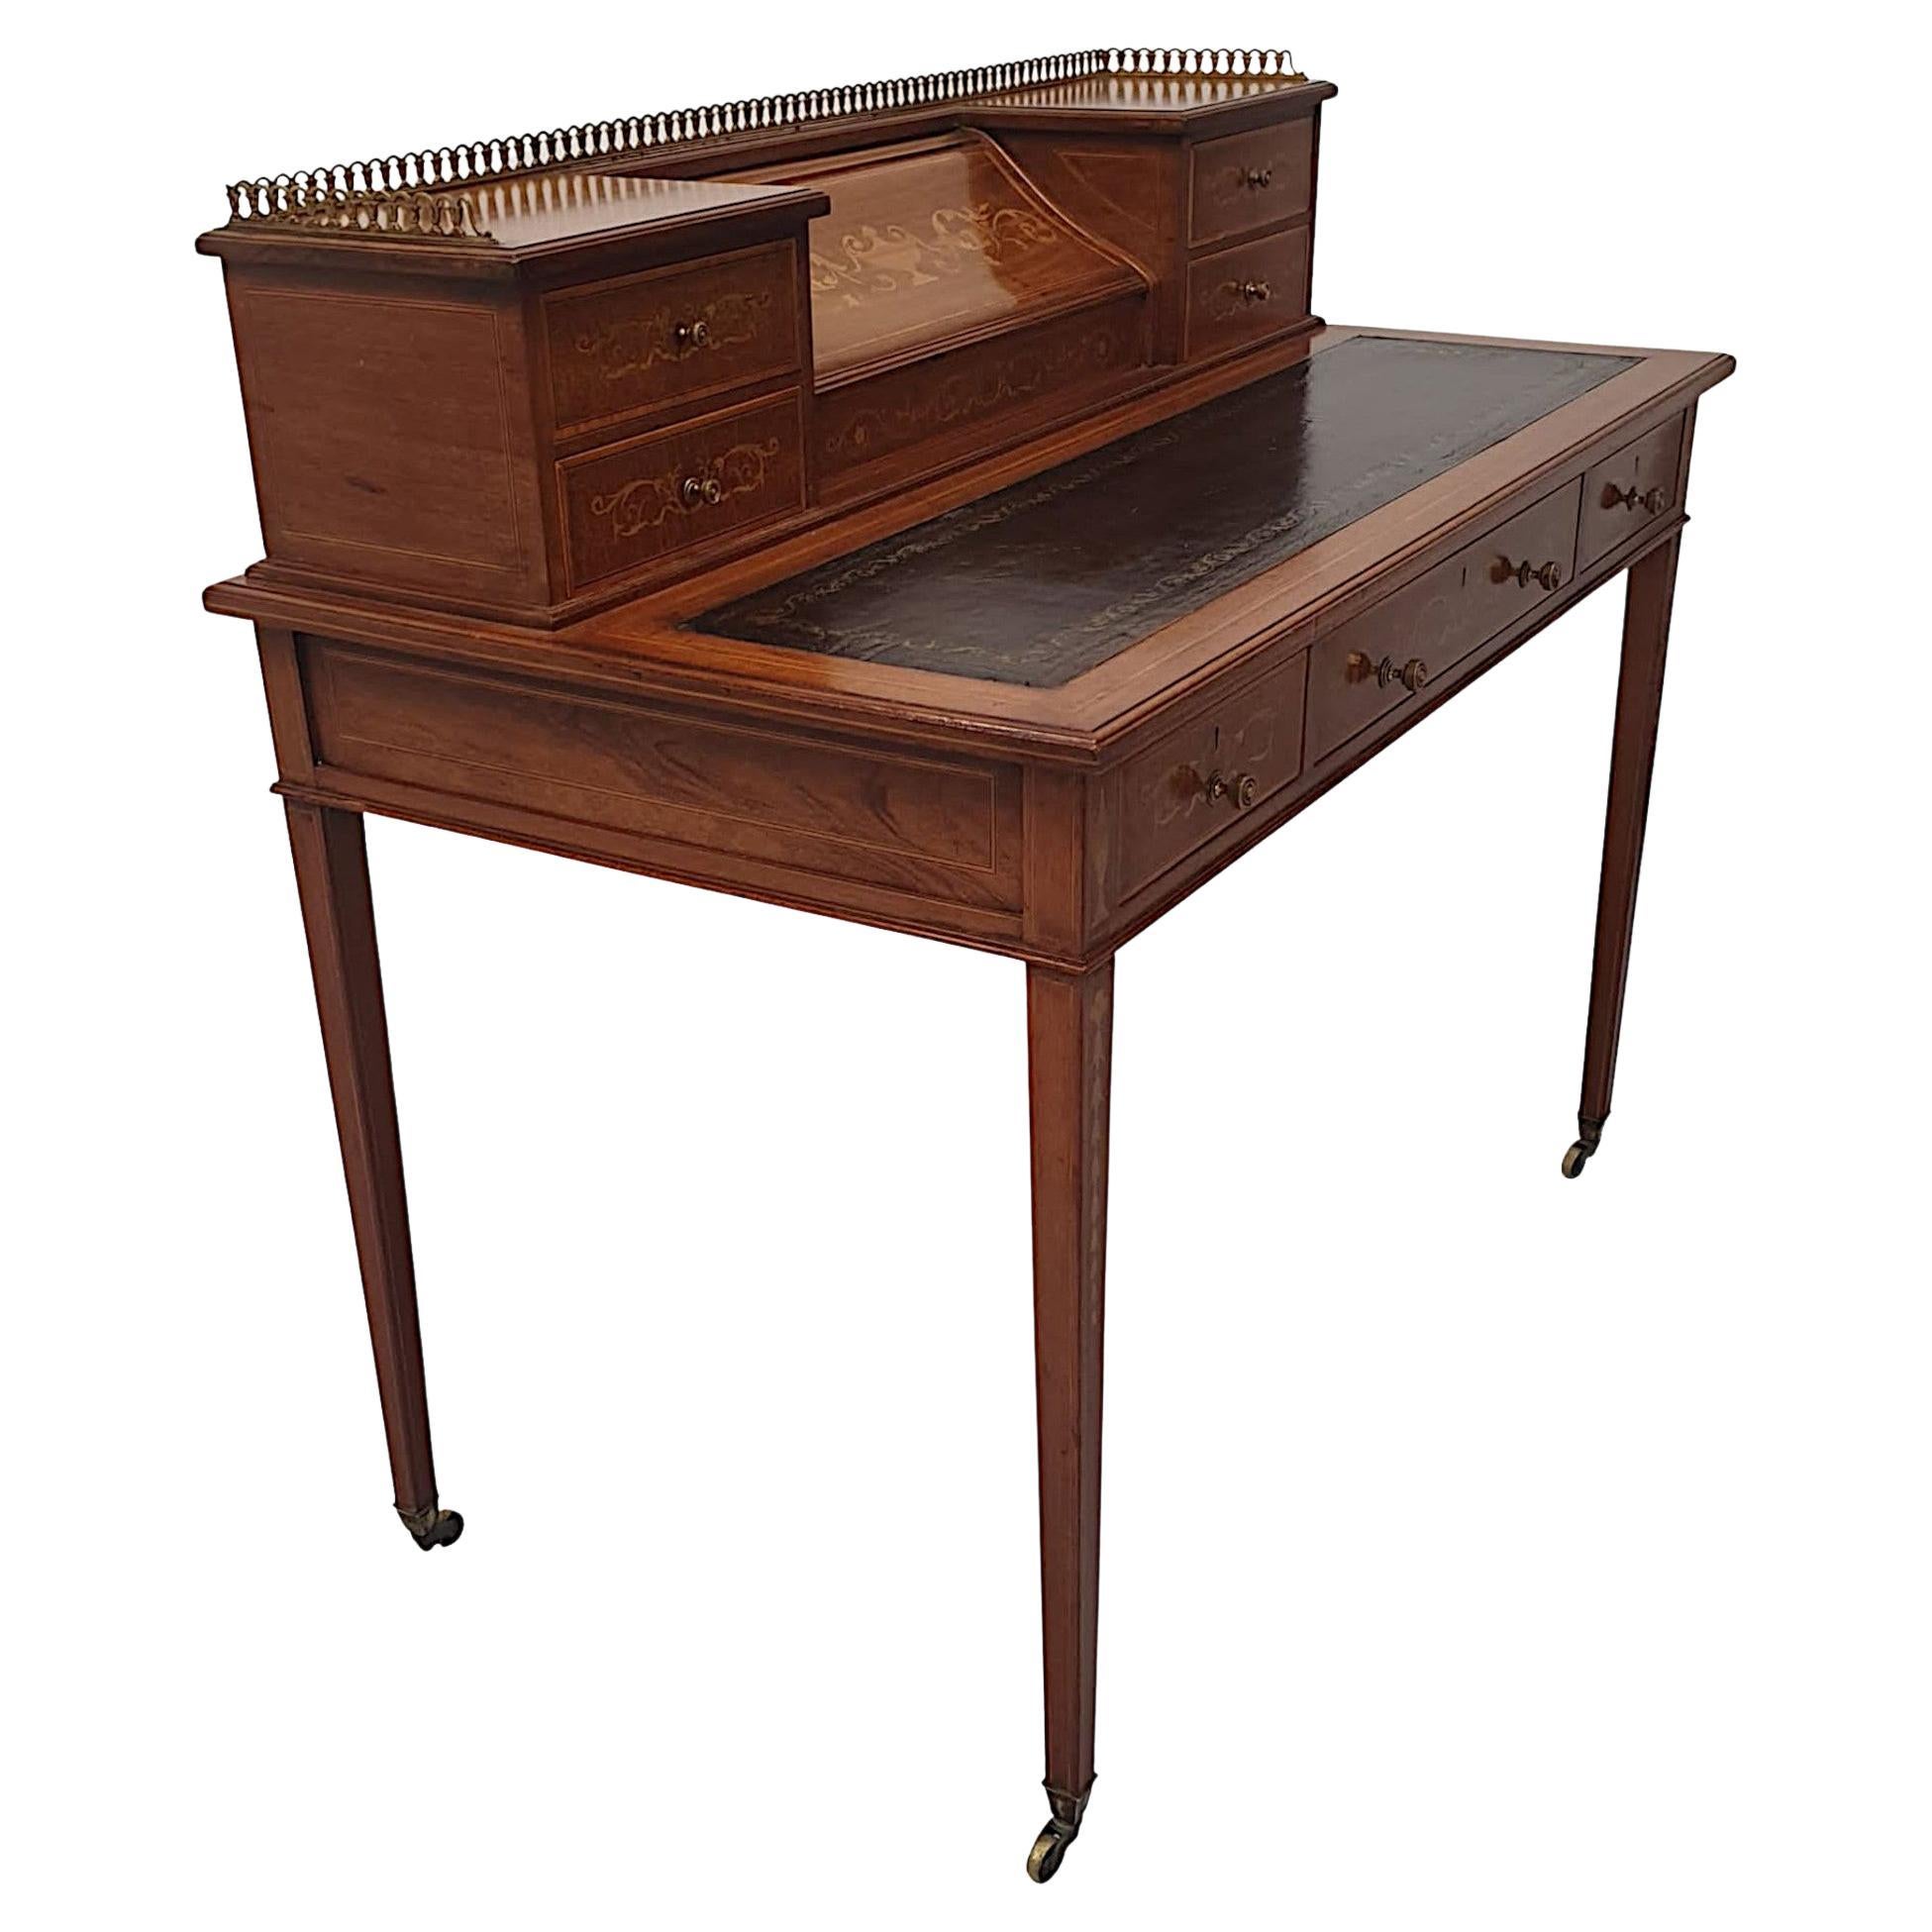 Very Fine Edwardian Desk Attributed to Edward and Roberts For Sale